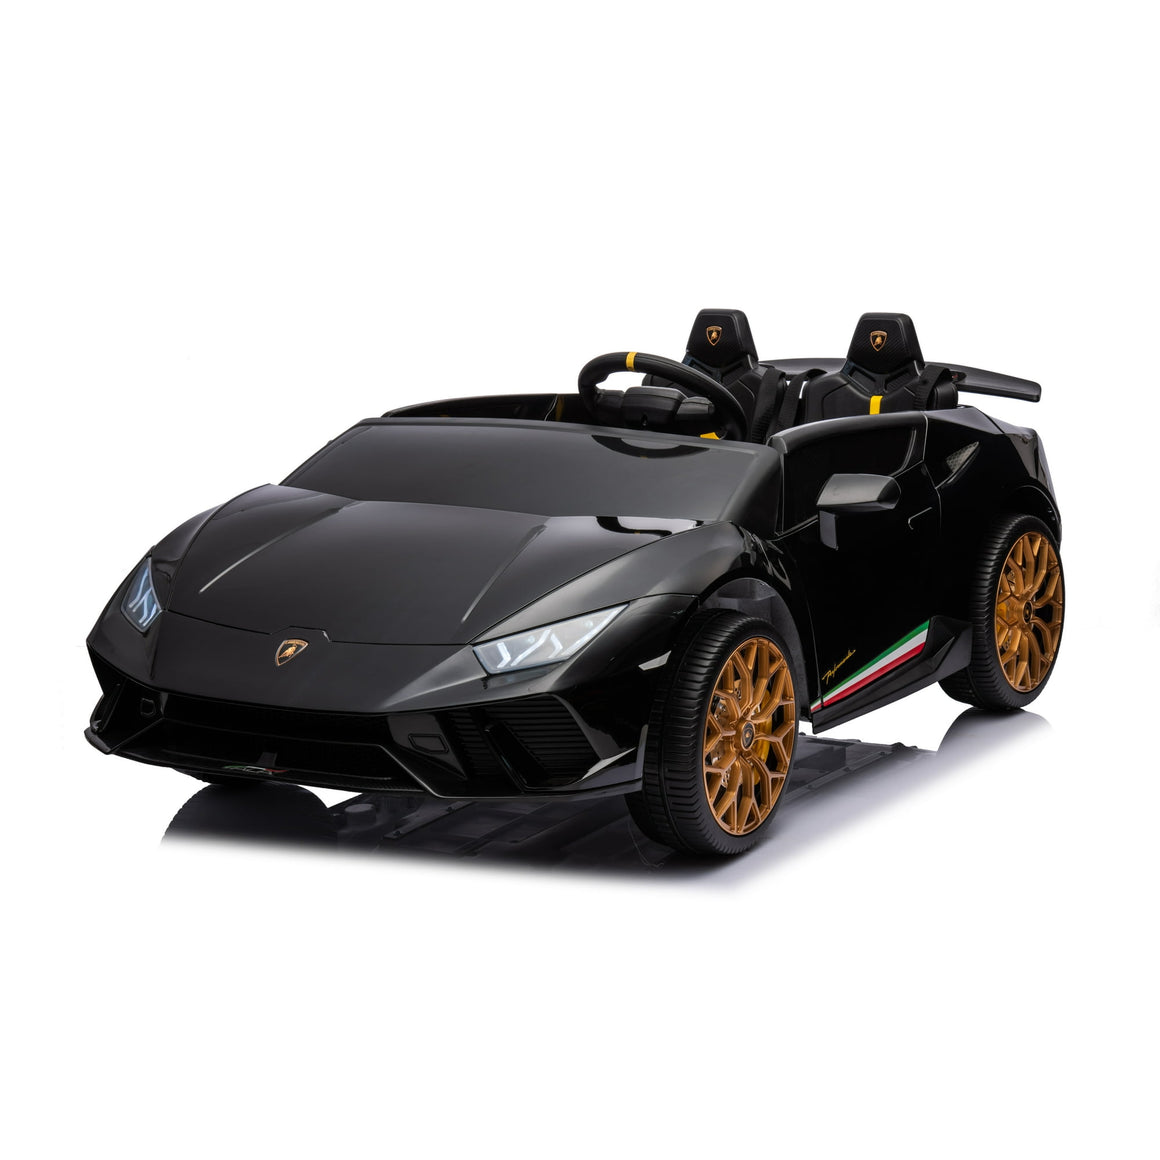 Lamborghini Huracan 24 V Powered Ride on Car Real 2 Seat, 4WD Electric Vehicle with Remote Control, Suspension, LED Light, Music, Bluetooth, Kids Ride on Toys for 3-8 years old Boys Girls